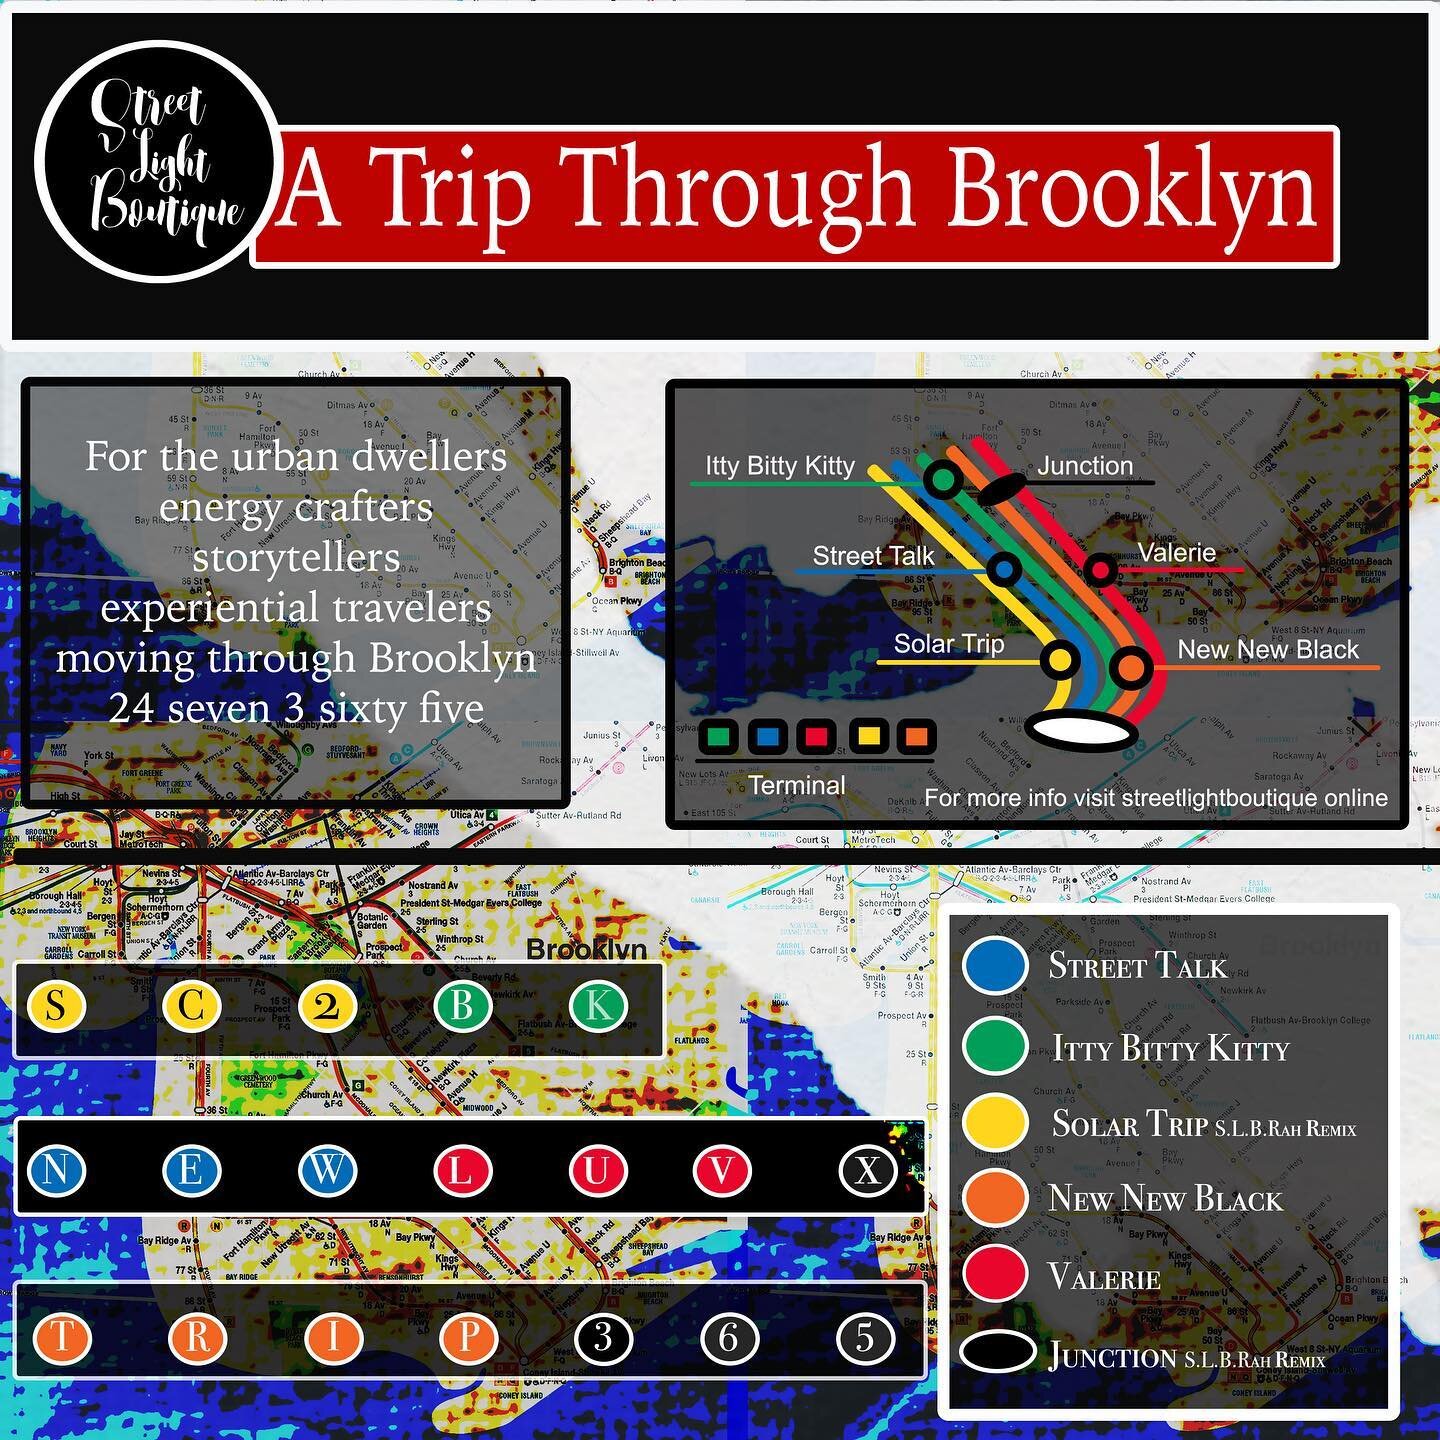 Check out the new project I worked on w/ @streetlightboutique &lsquo;A Trip Through Brooklyn&rsquo; 🔥🔥🔥💯💯 Link in bio! #SLBRahOnDaTrack #SLBRah #SLB #producer #engineer #hiphop #beats #remixes #SolarTripRemix #JunctionRemix